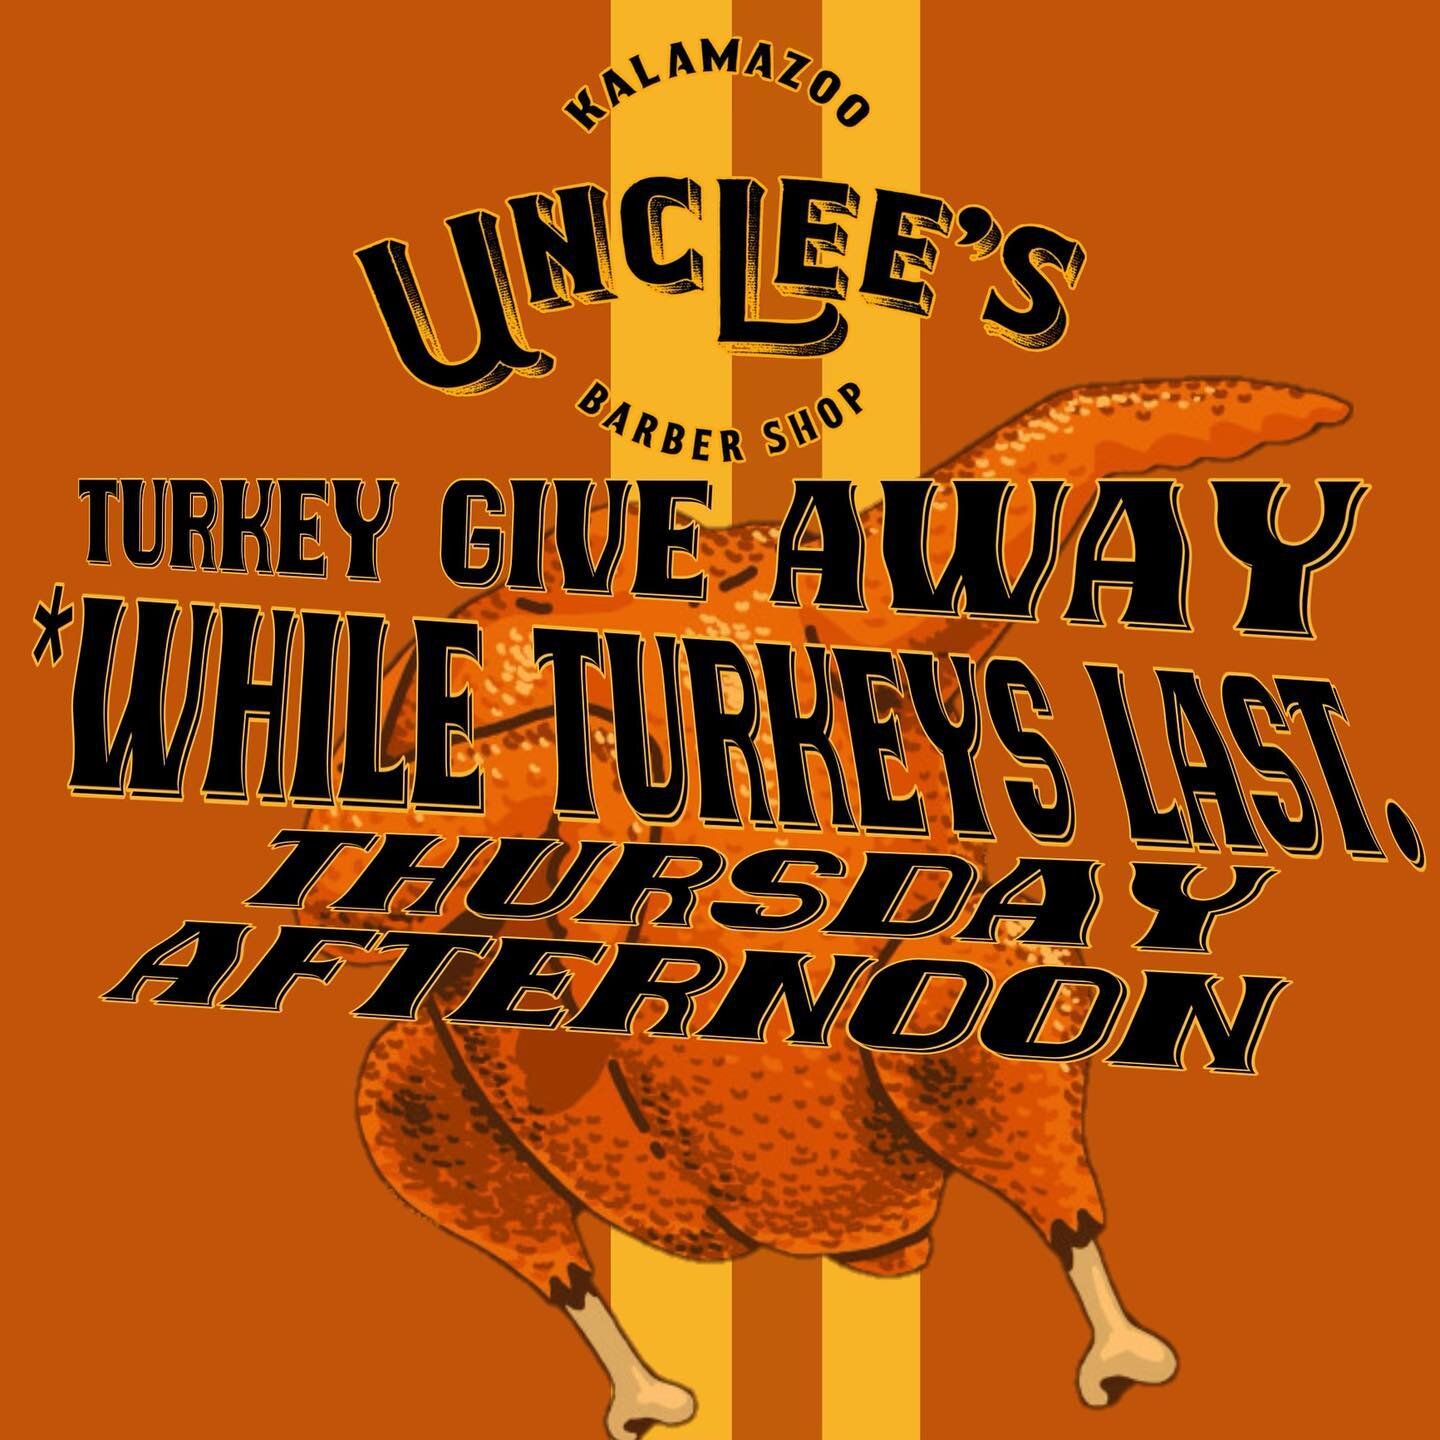 PLEASE SHARE!! We will have Thanksgiving Turkeys to GIVE away tomorrow 11-17 at Unclees barbershop 1909 West Main for families on need.  Kalamazoo love❤️❤️